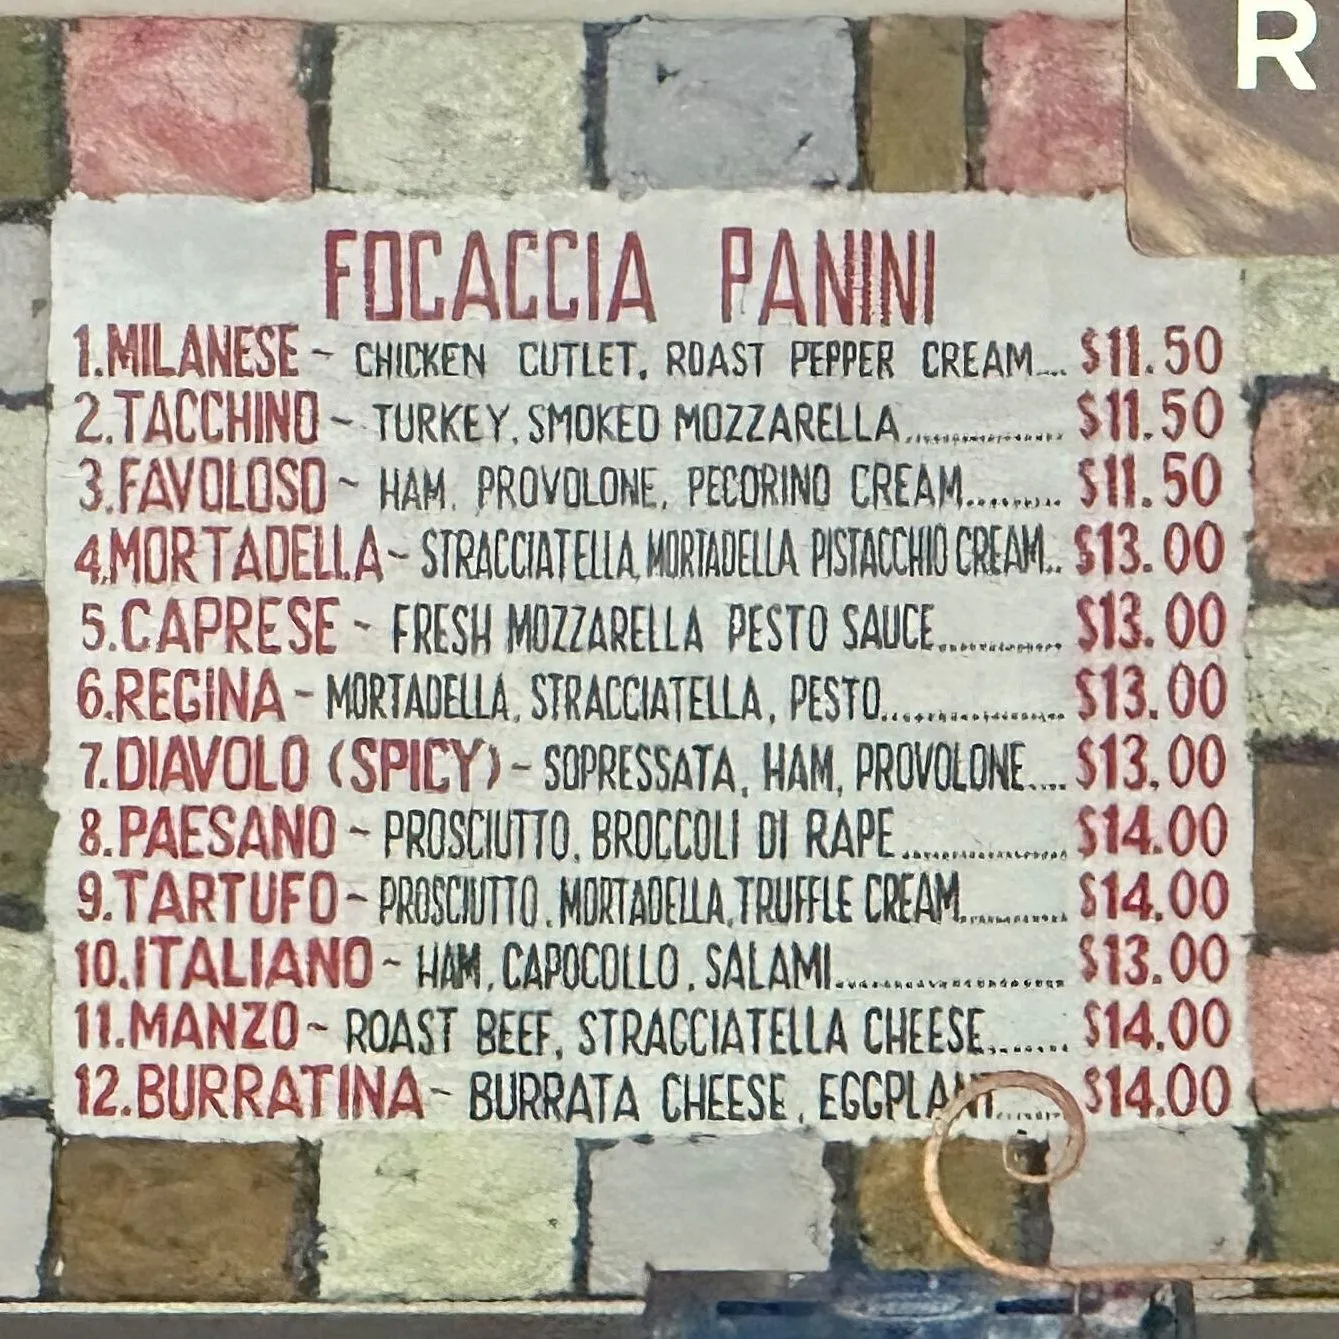 New Pizza Spot Opening In Clearwater Panini Menu